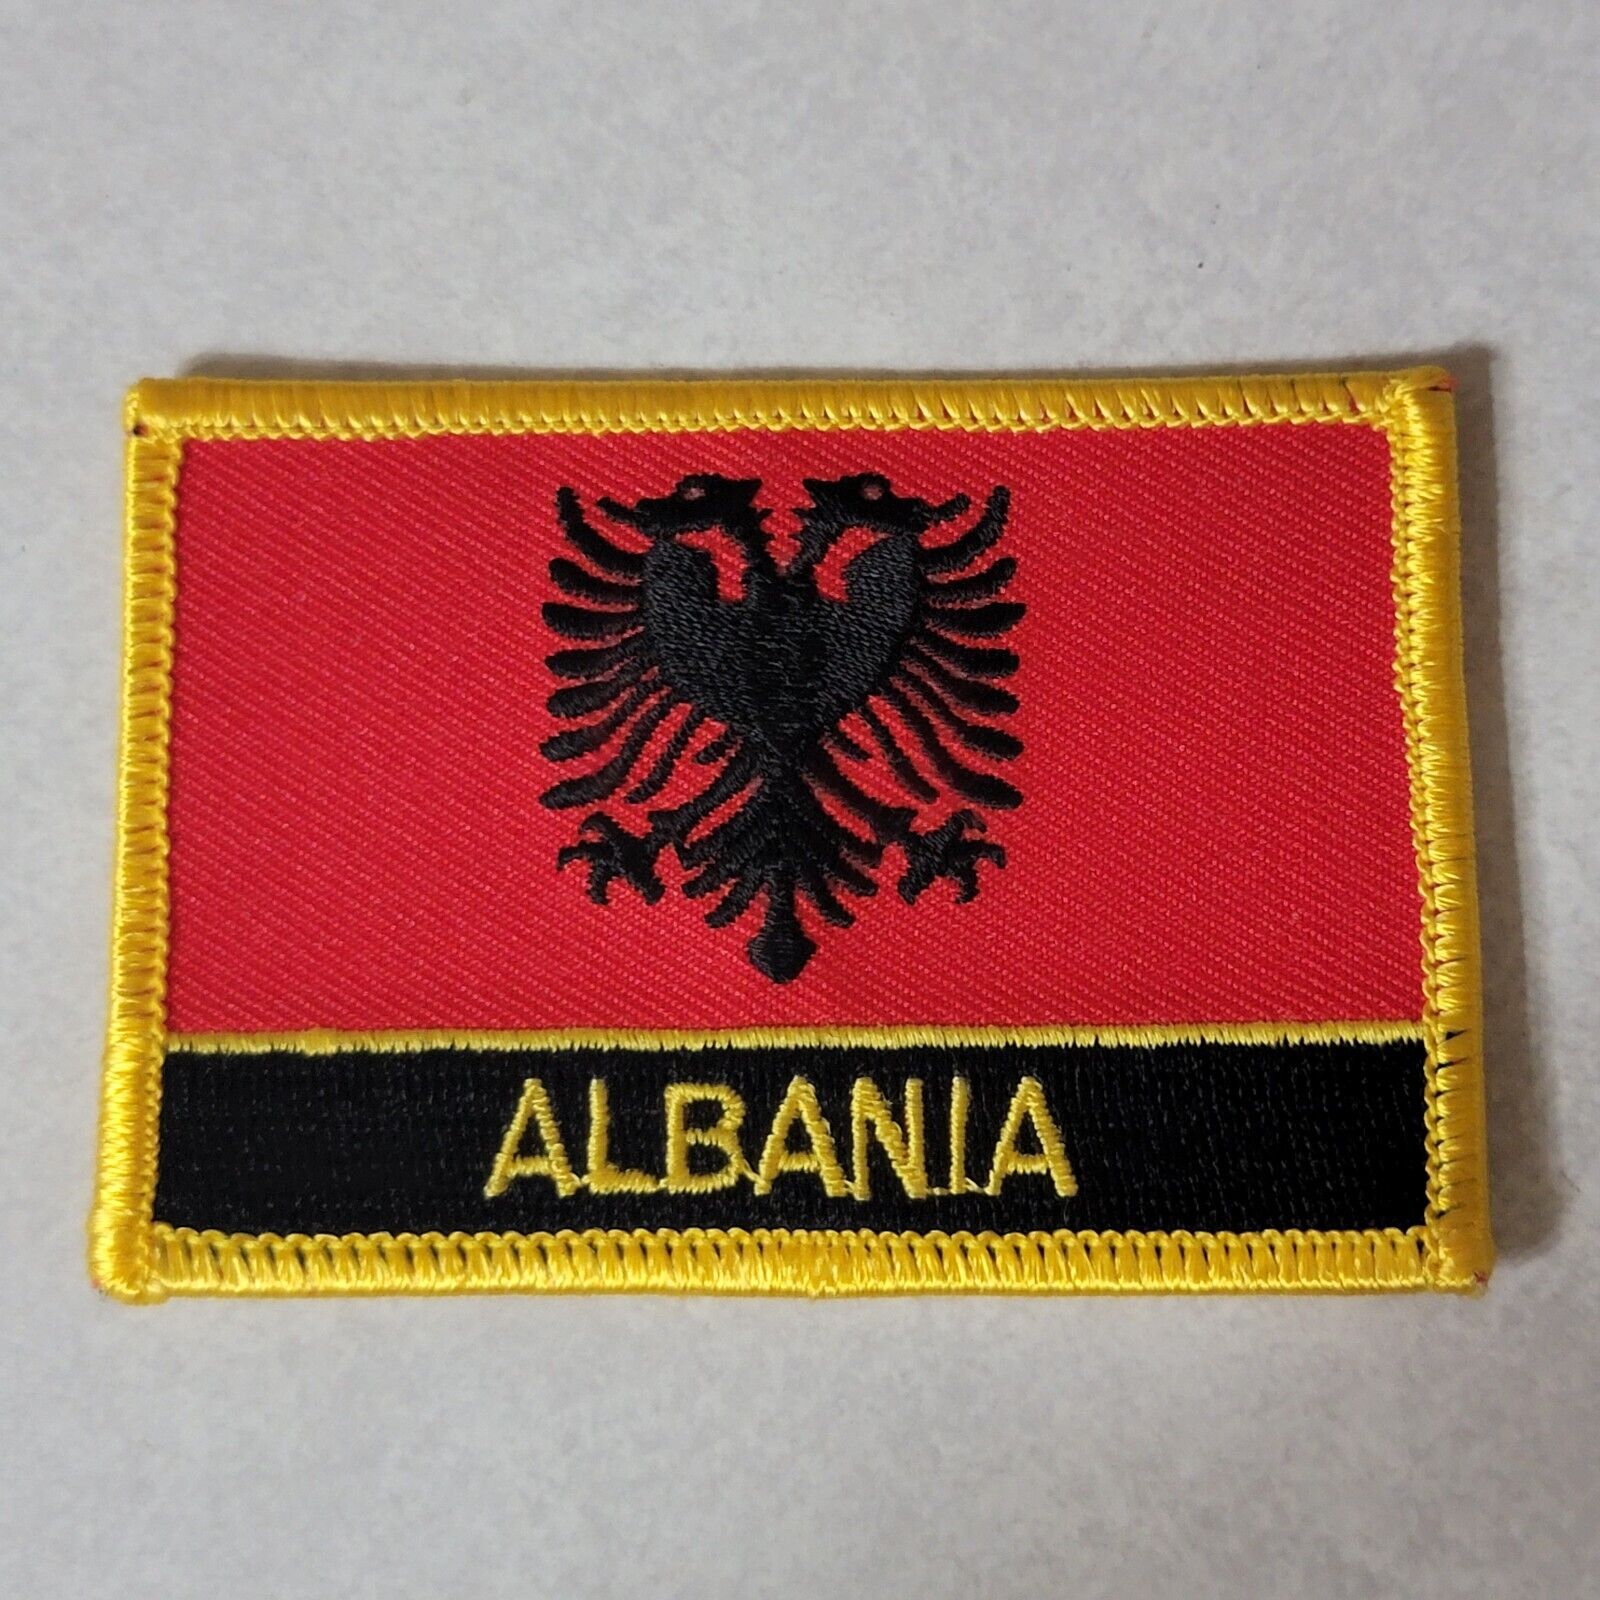 Albania Flag Patch Embroidered 